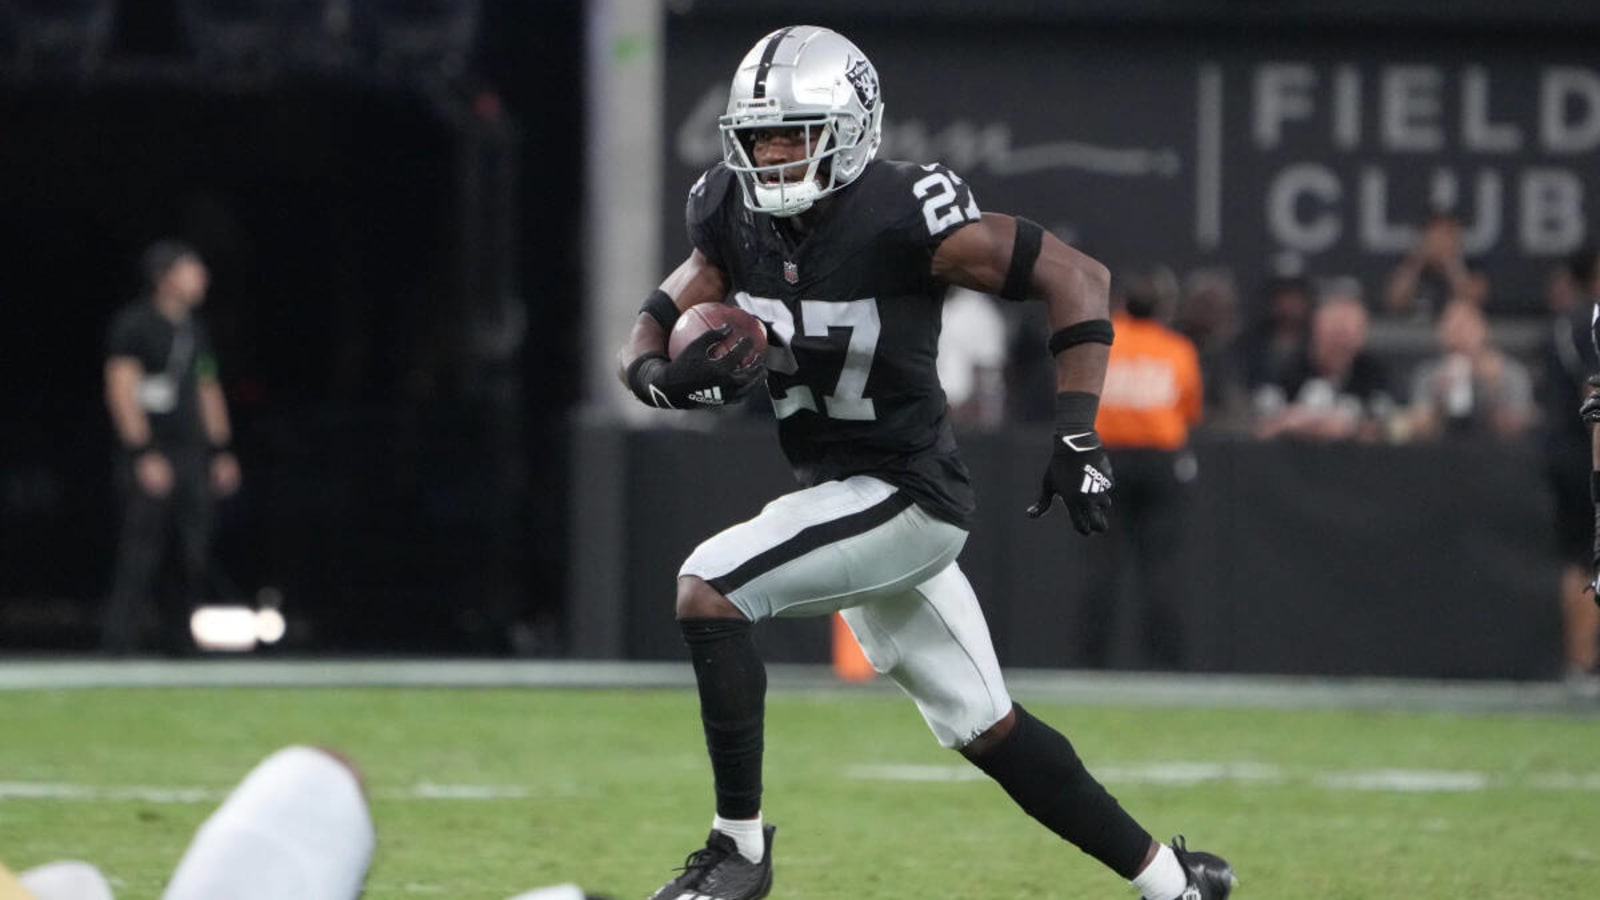 Raiders make roster elevations and moves after big win vs. Patriots